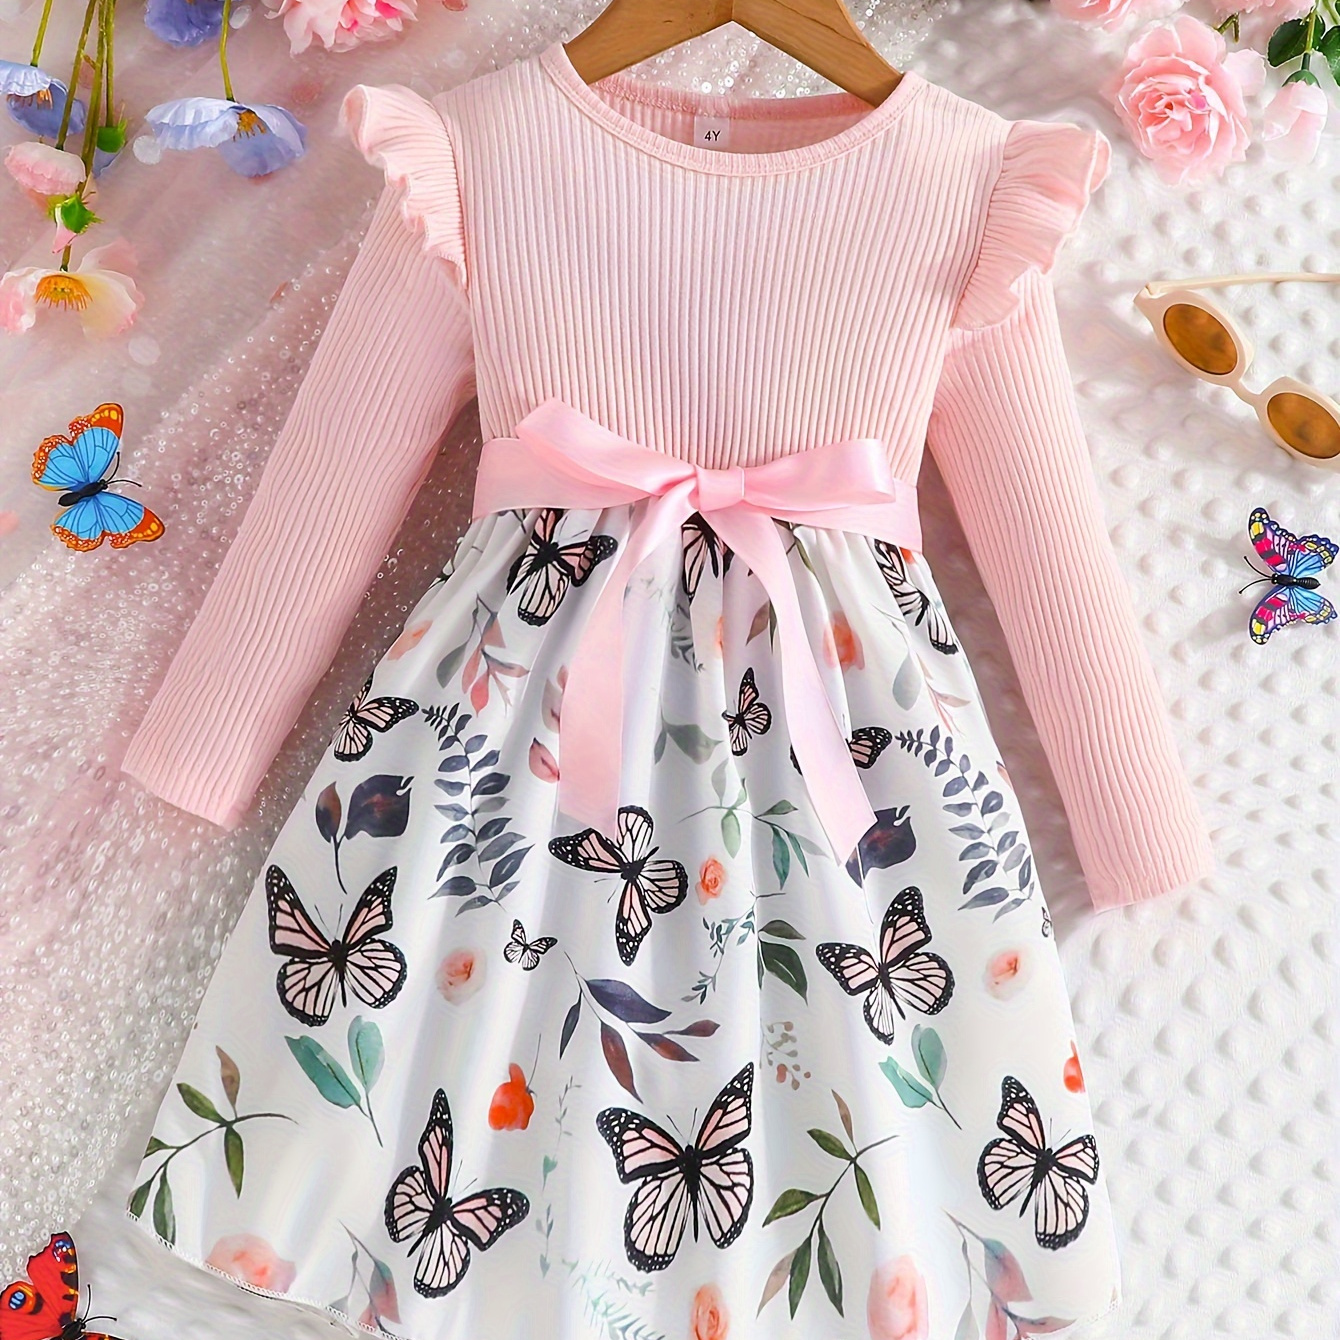 

Girls Ribbed Knit Flutter Trim Butterfly Print Dress With Bow Comfy Cotton Dress For Spring Fall Party Kids Clothes